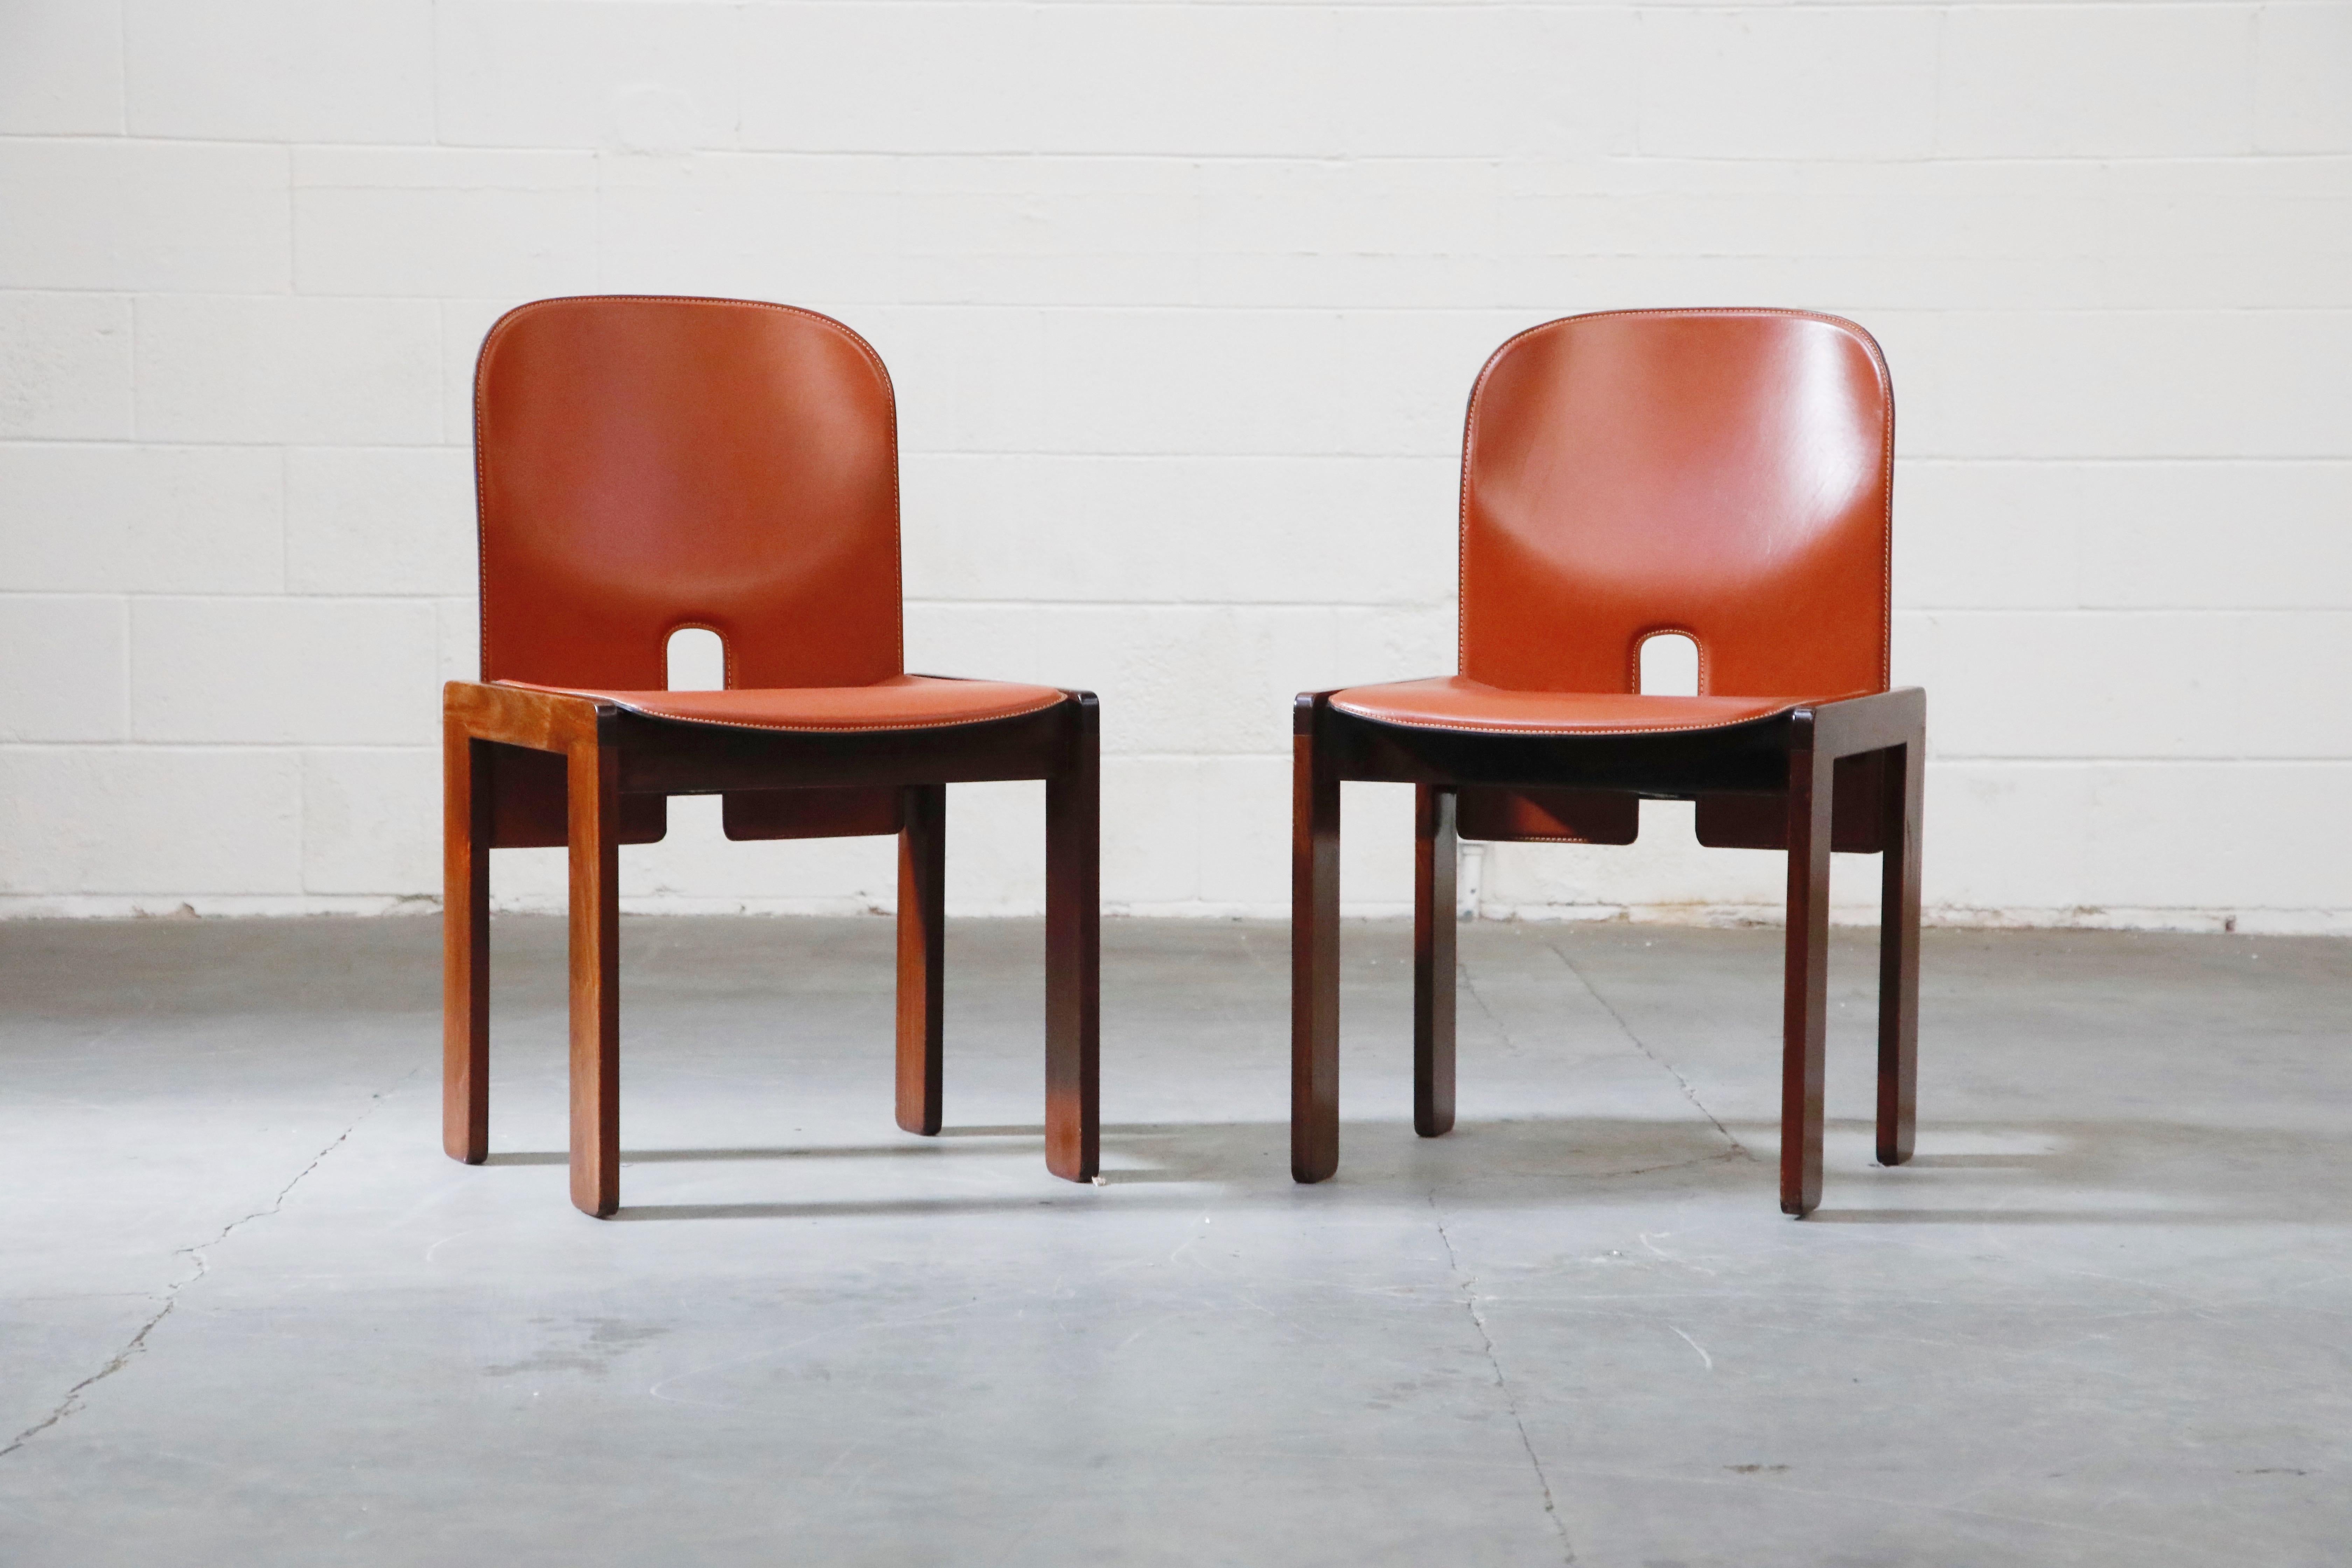 This highly collectible and simply incredible pair of rust-orange colored saddle leather and Rosewood model 121 chairs are by Afra and Tobia Scarpa for Cassina. This particular pair is a perfect collectors set due to several reasons detailed below,